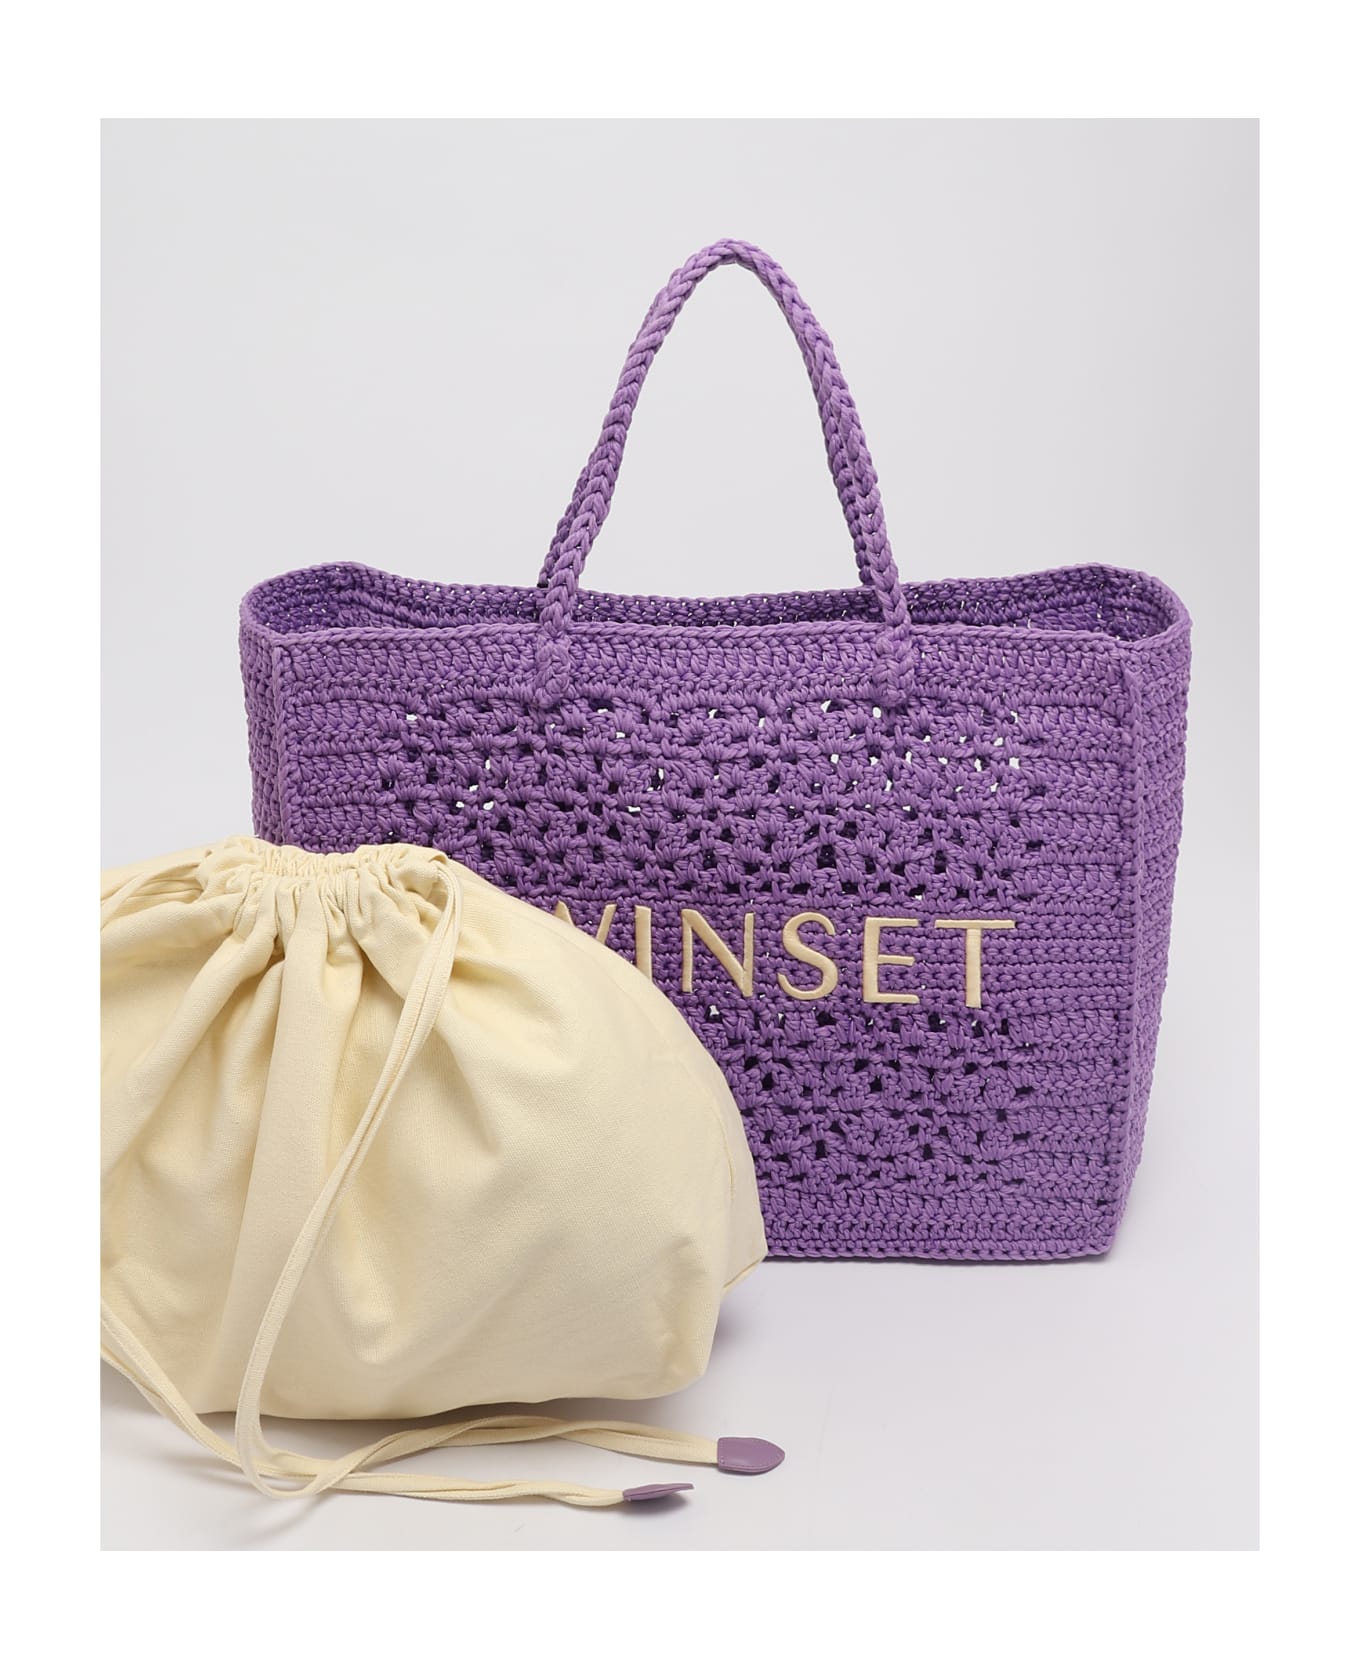 TwinSet Poliester Tote - GIACINTO トートバッグ